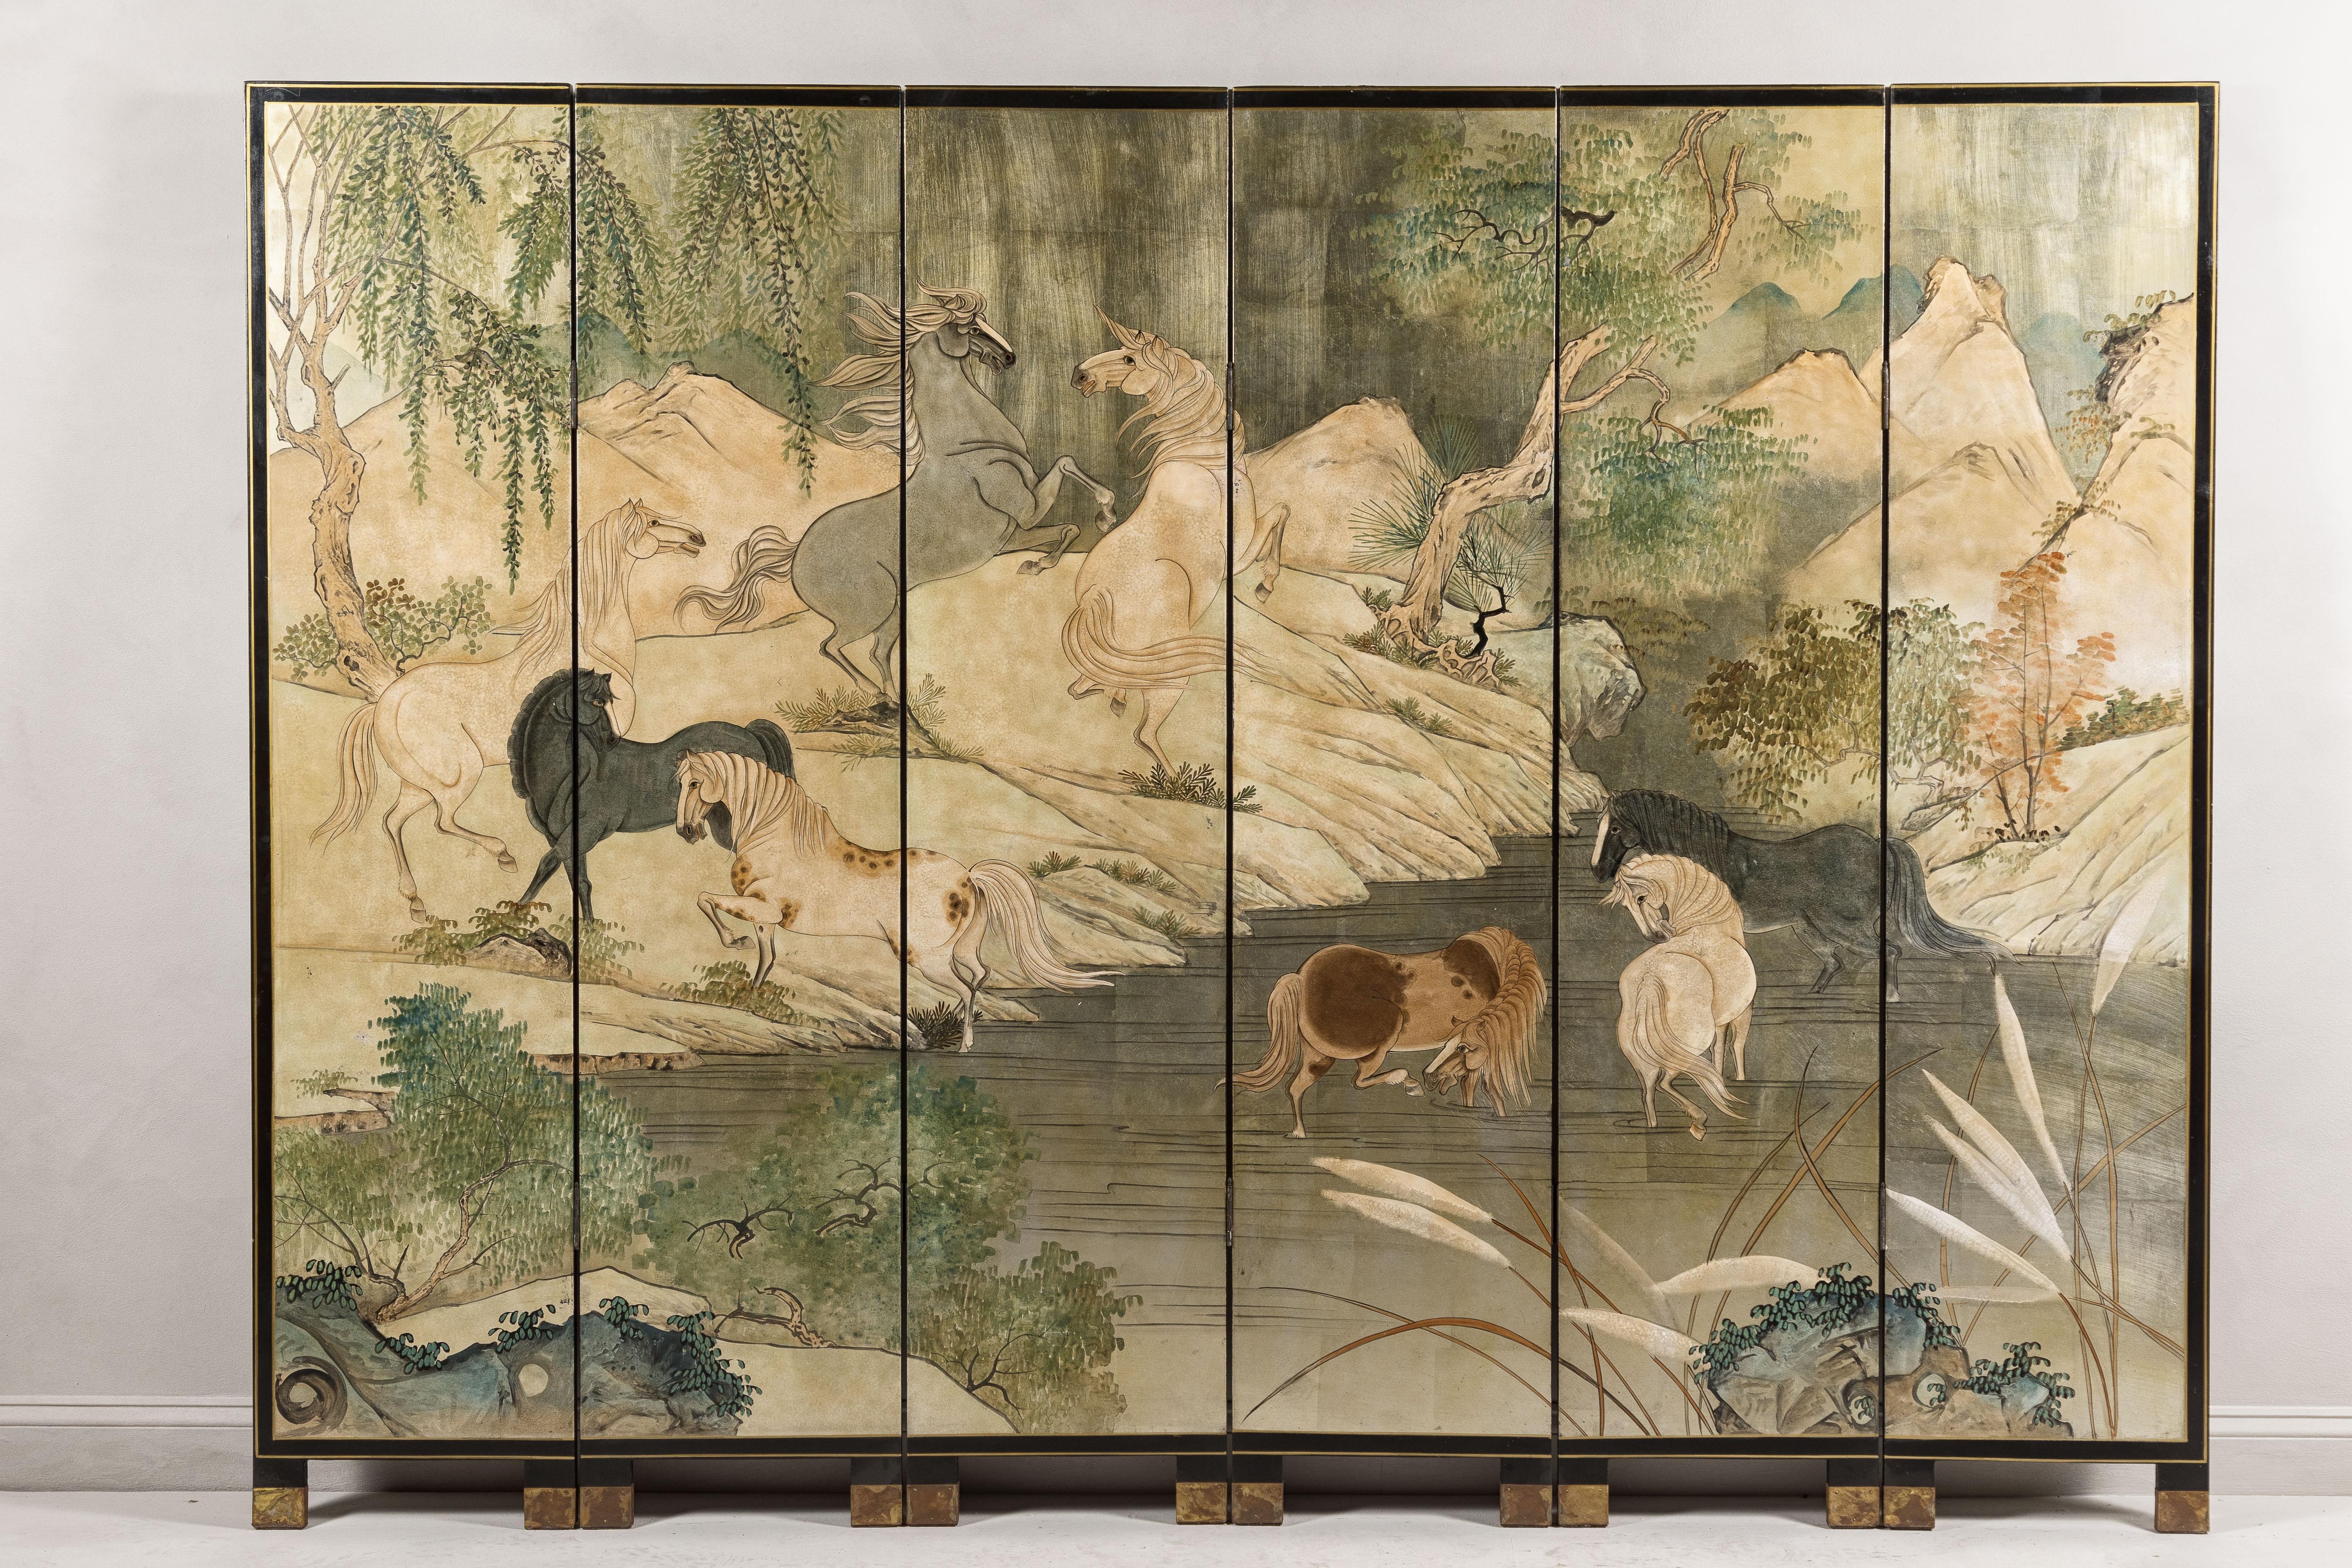 A Japanese vintage six-panel folding gilded screen with landscape and mythical horses. This vintage Japanese six-panel folding screen is a magnificent representation of gilded artistry, showcasing a vivid landscape bustling with mythical horses. The